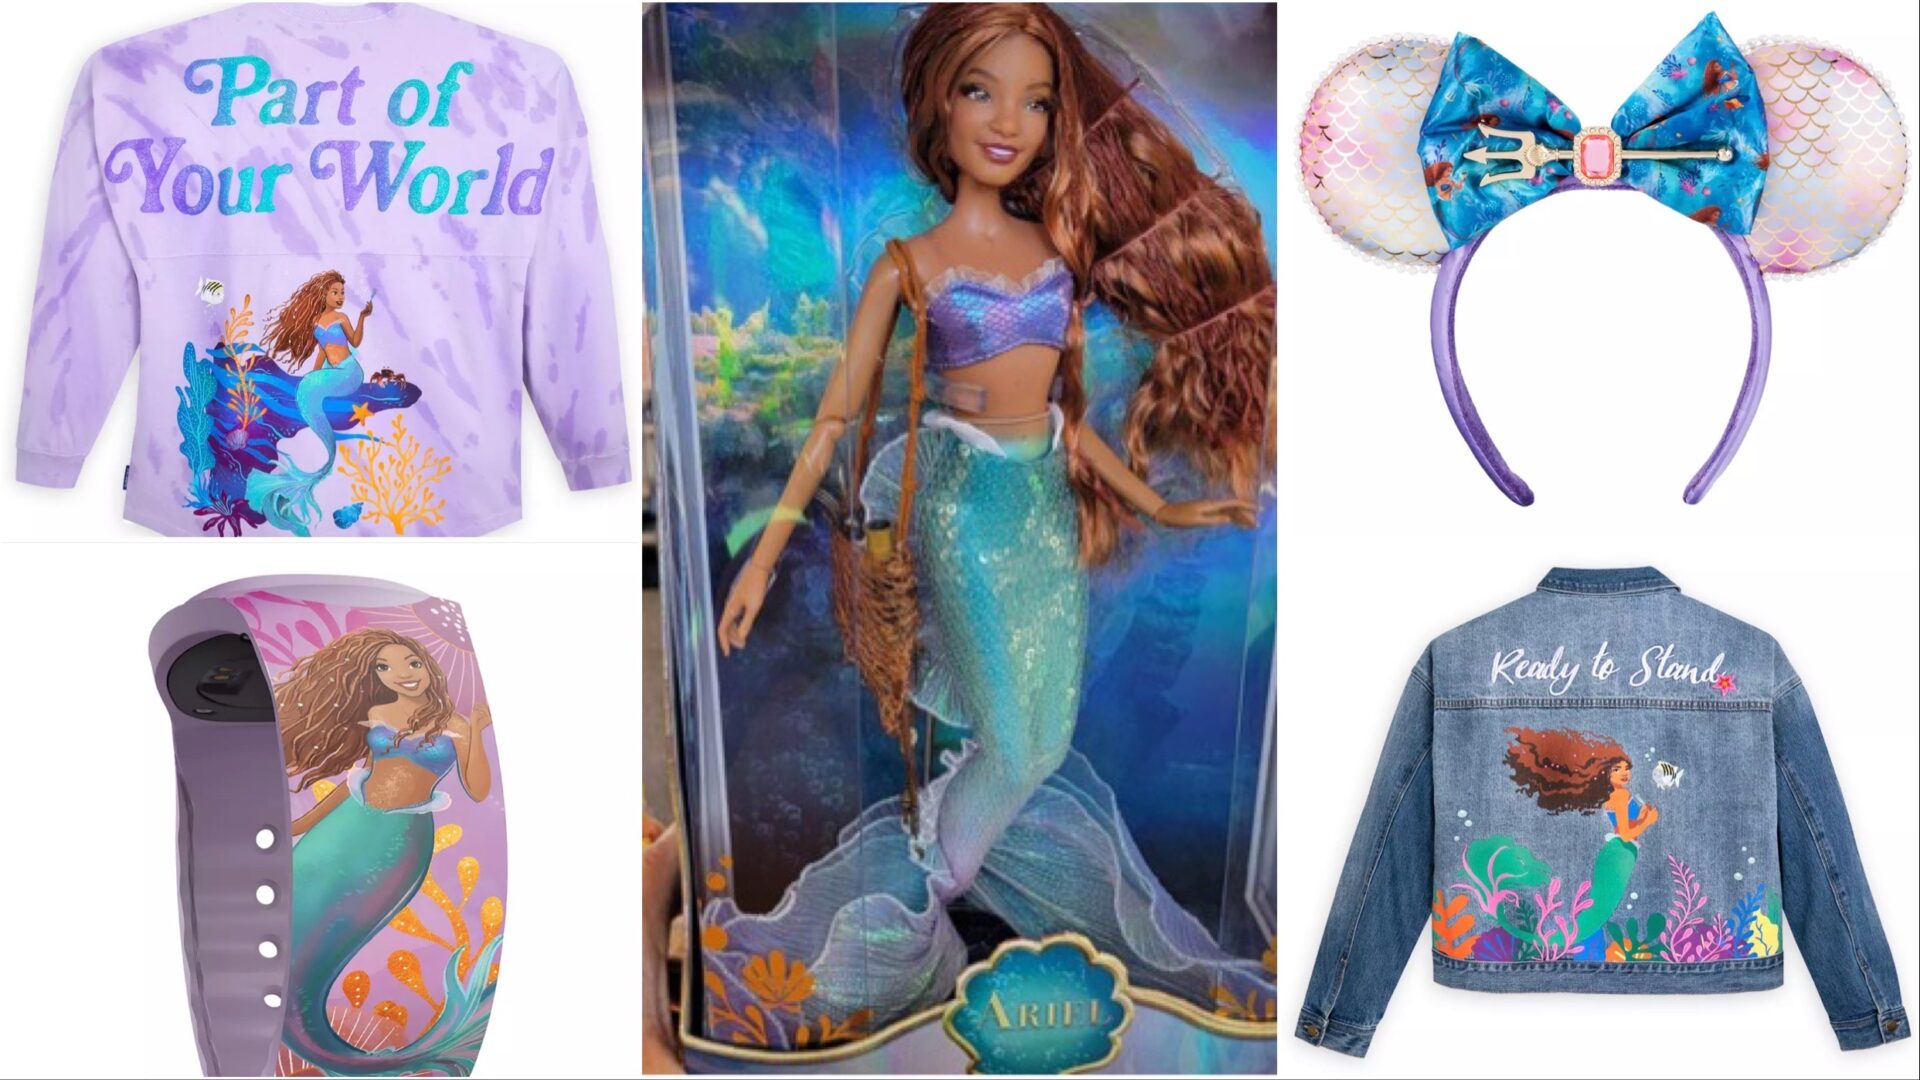 New The Little Mermaid Live Action Merchandise Available Now!